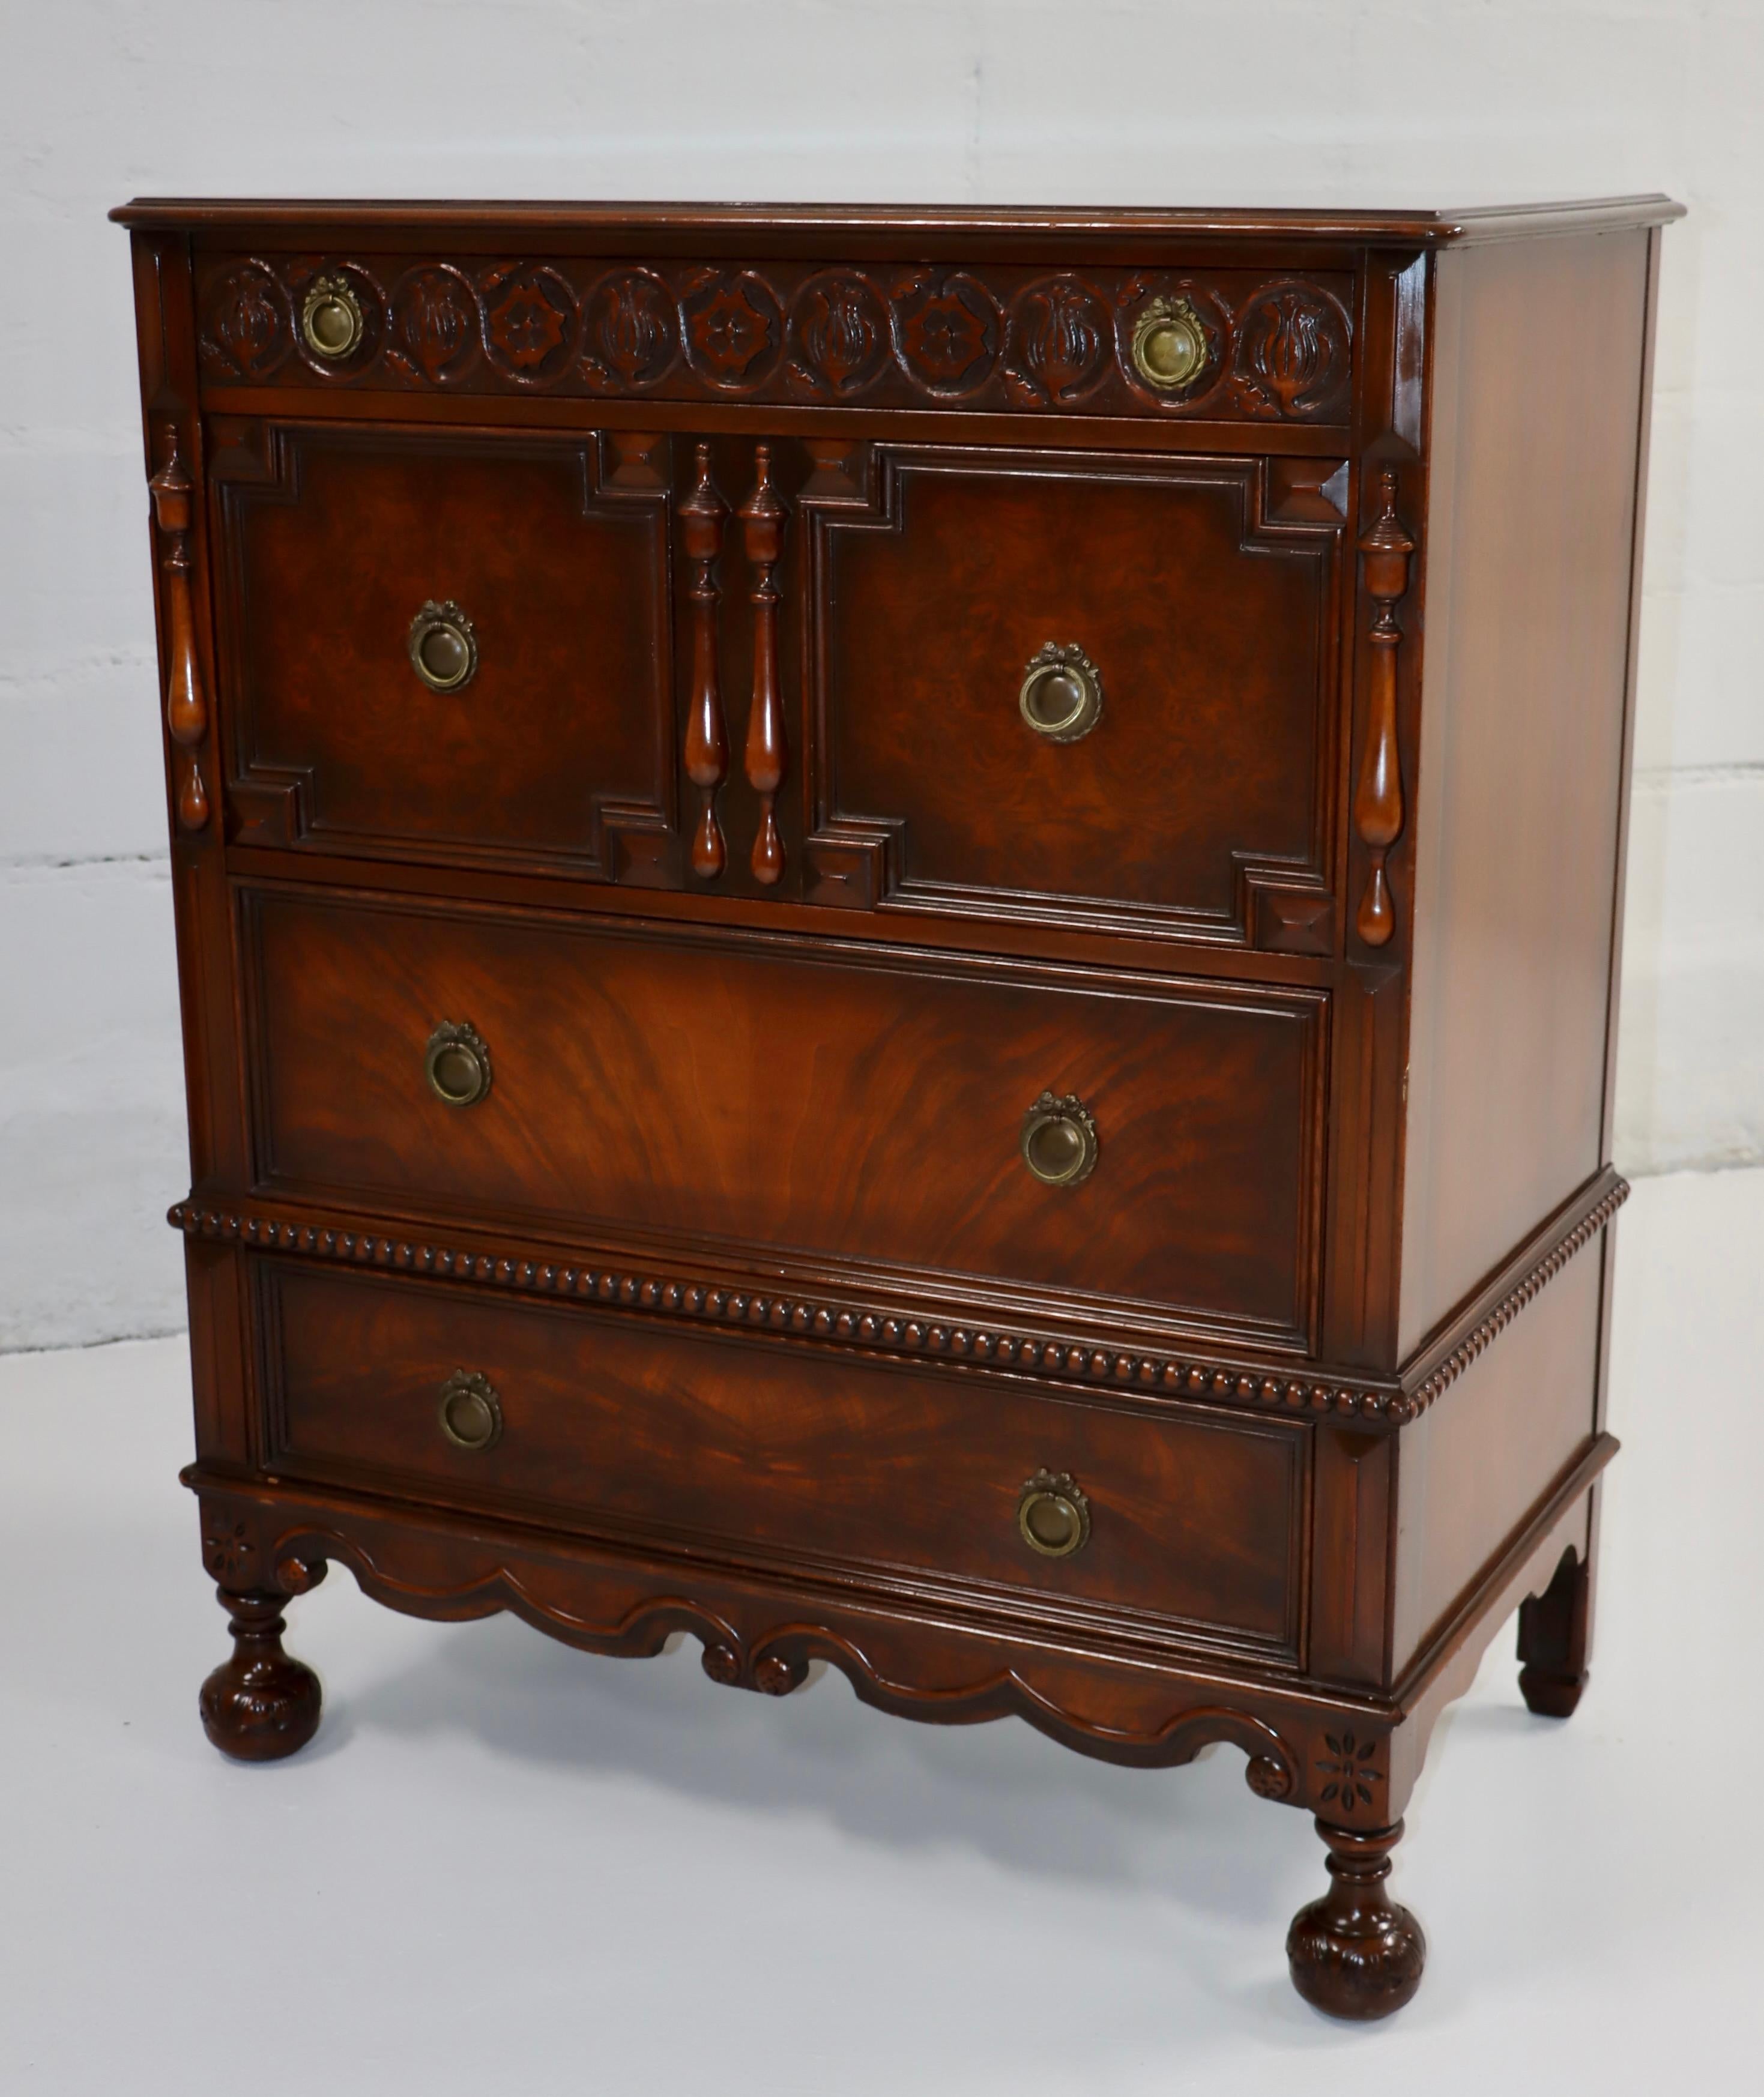 1940's Tall Dresser By Berkey & Gay Furniture With Amazing Carved Wood Detail 2